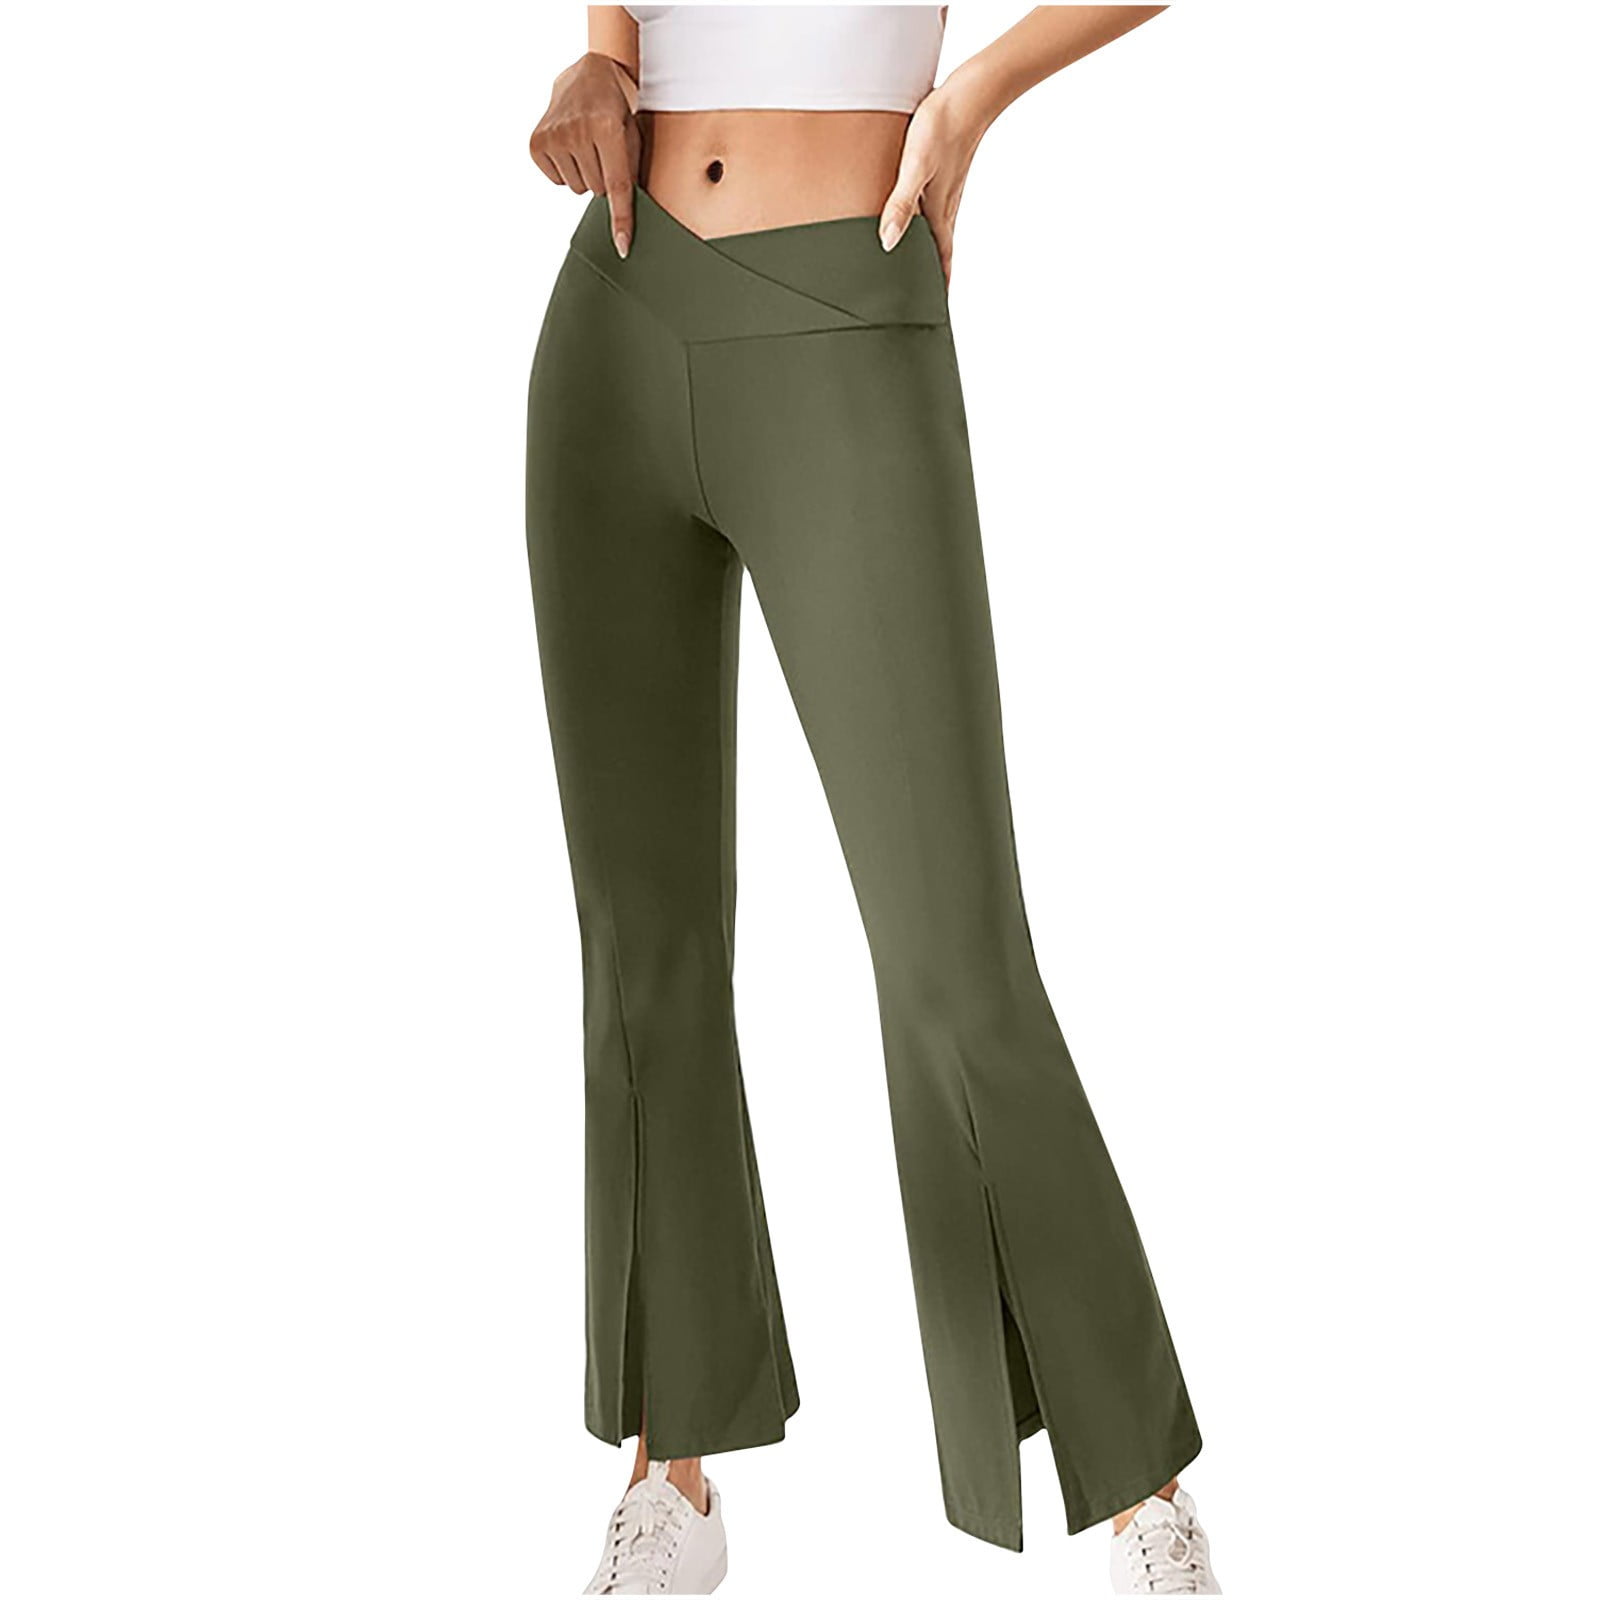 HHei_K Fashion Womens Sexy Loose Slit Casual Pants High Waist Solid Color  Sports Yoga Pants linen pants for women